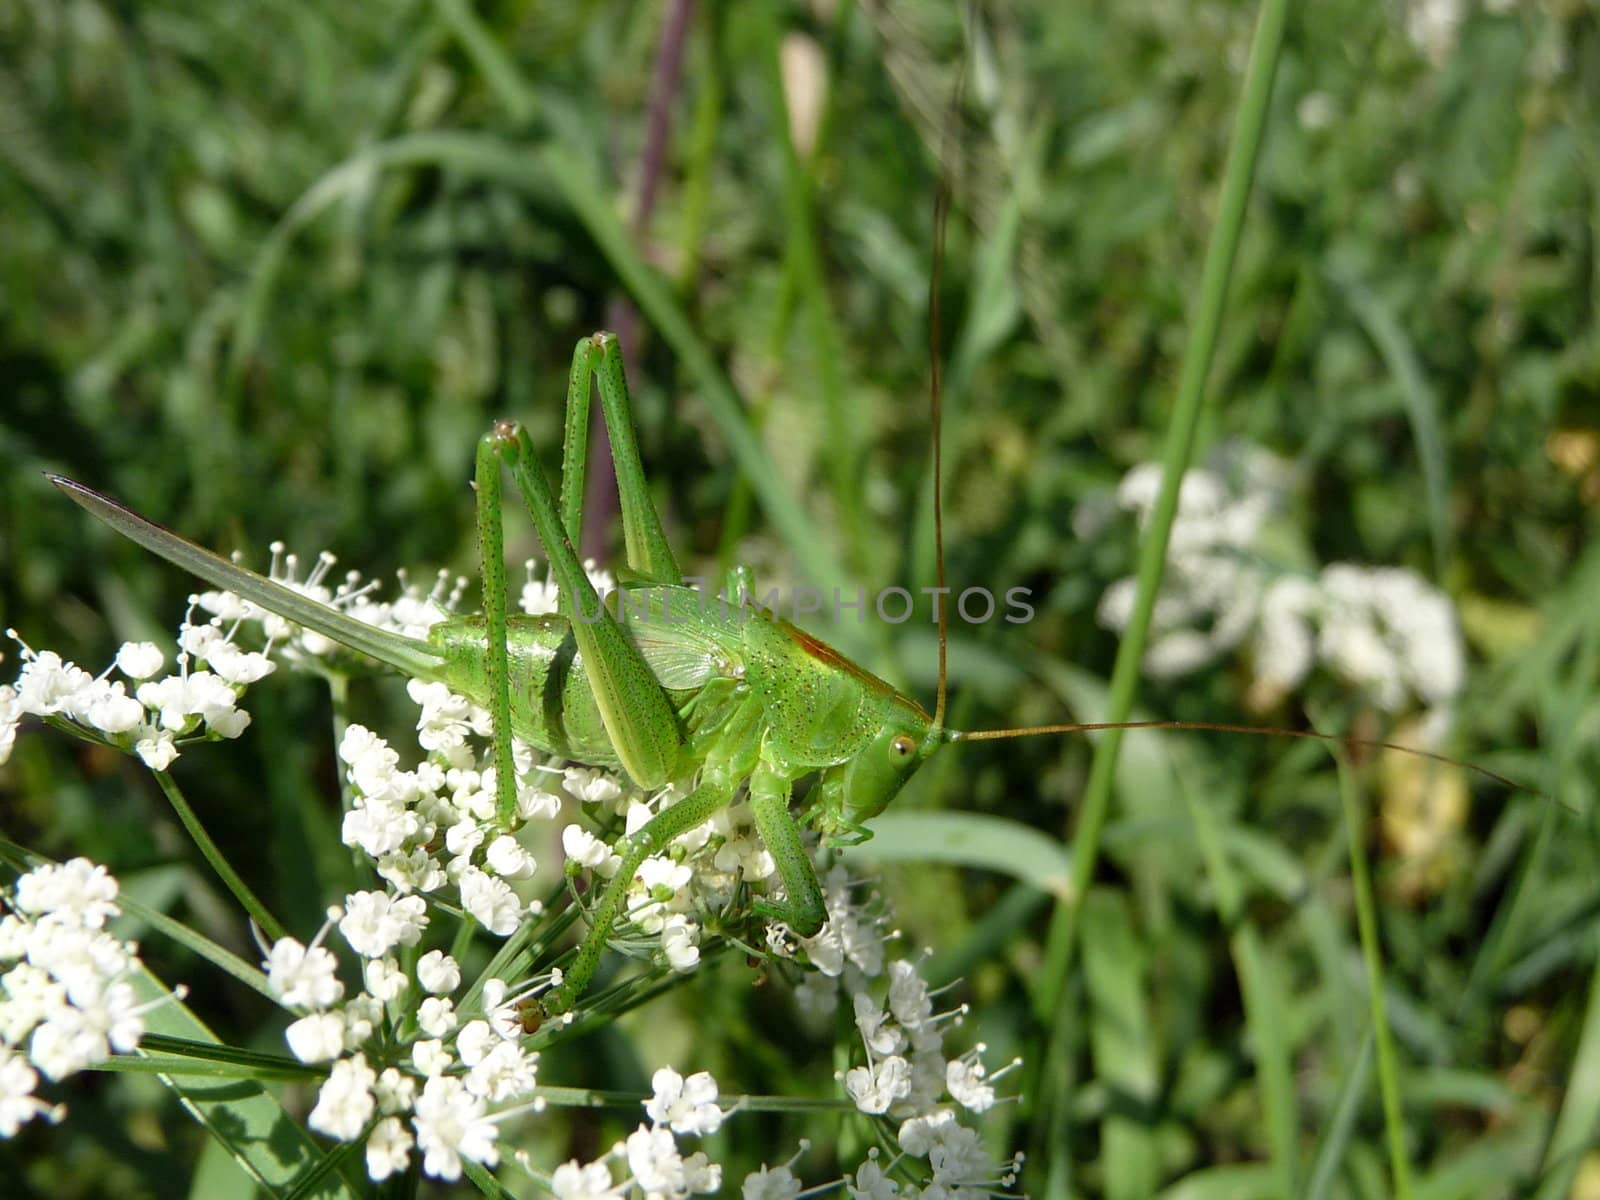 Grasshopper on flowers by tomatto